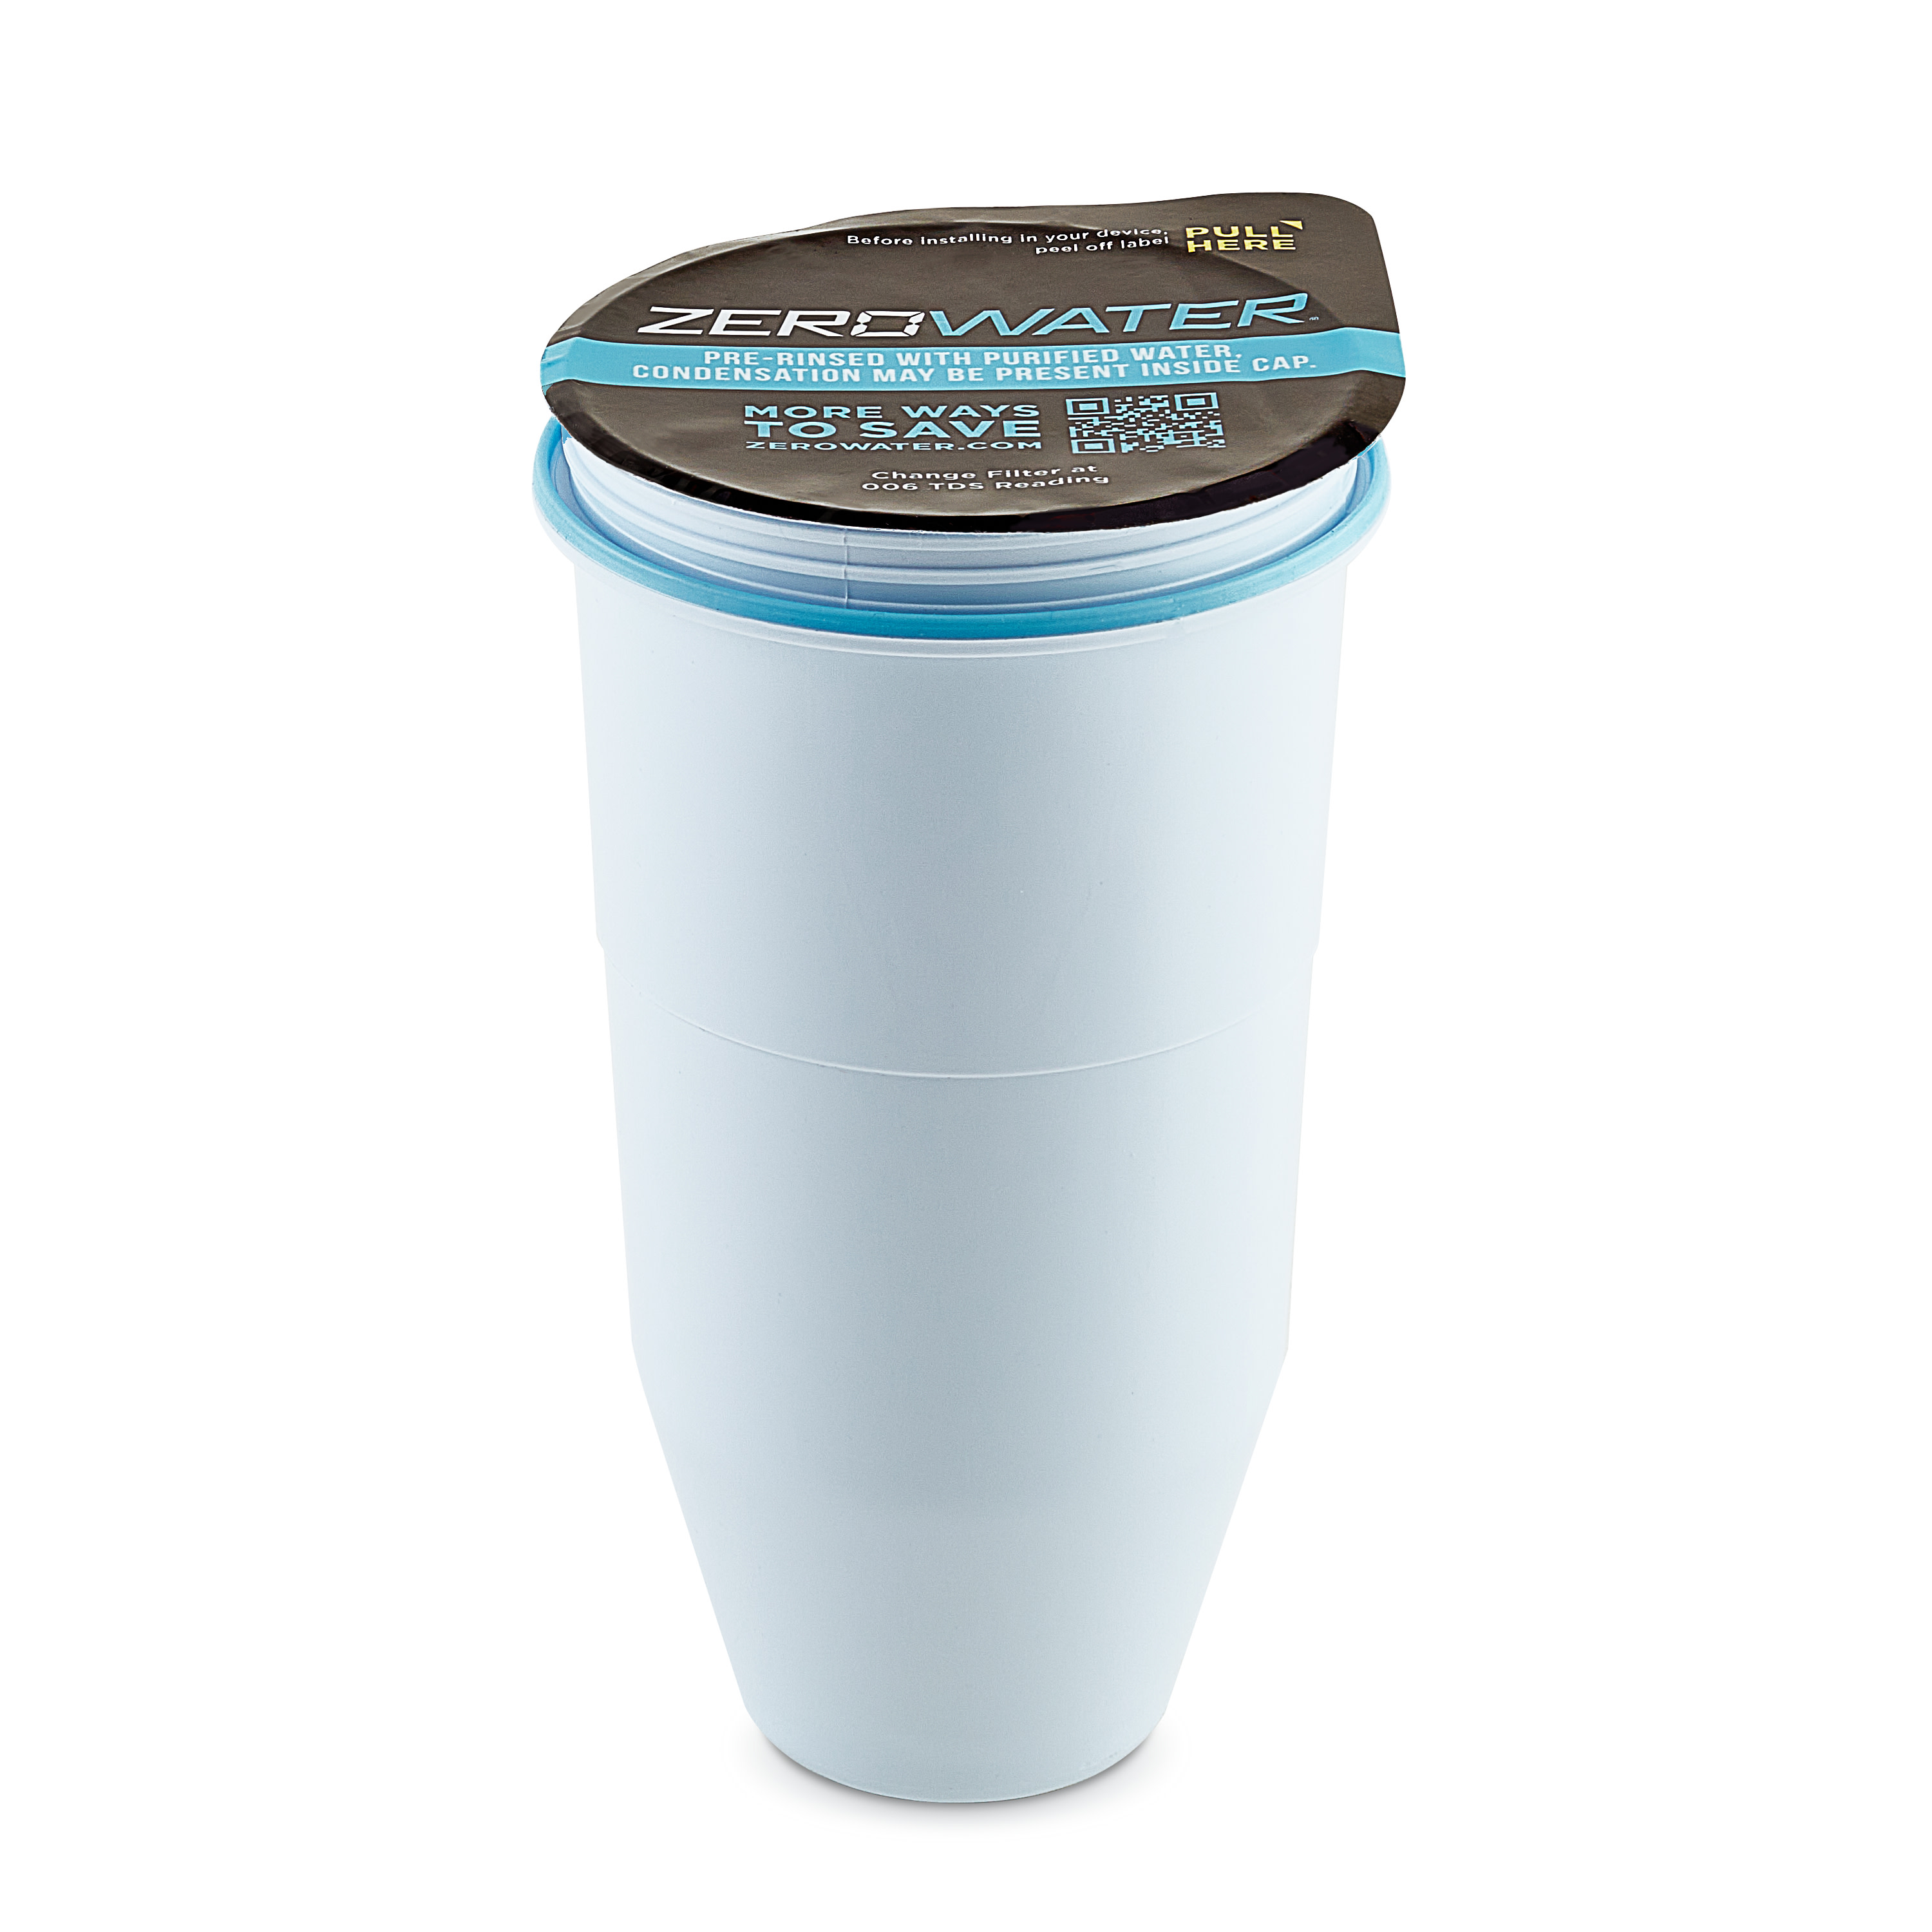 Zerowater 5-Stage Water Filter Replacement - 1 Pack - image 1 of 3